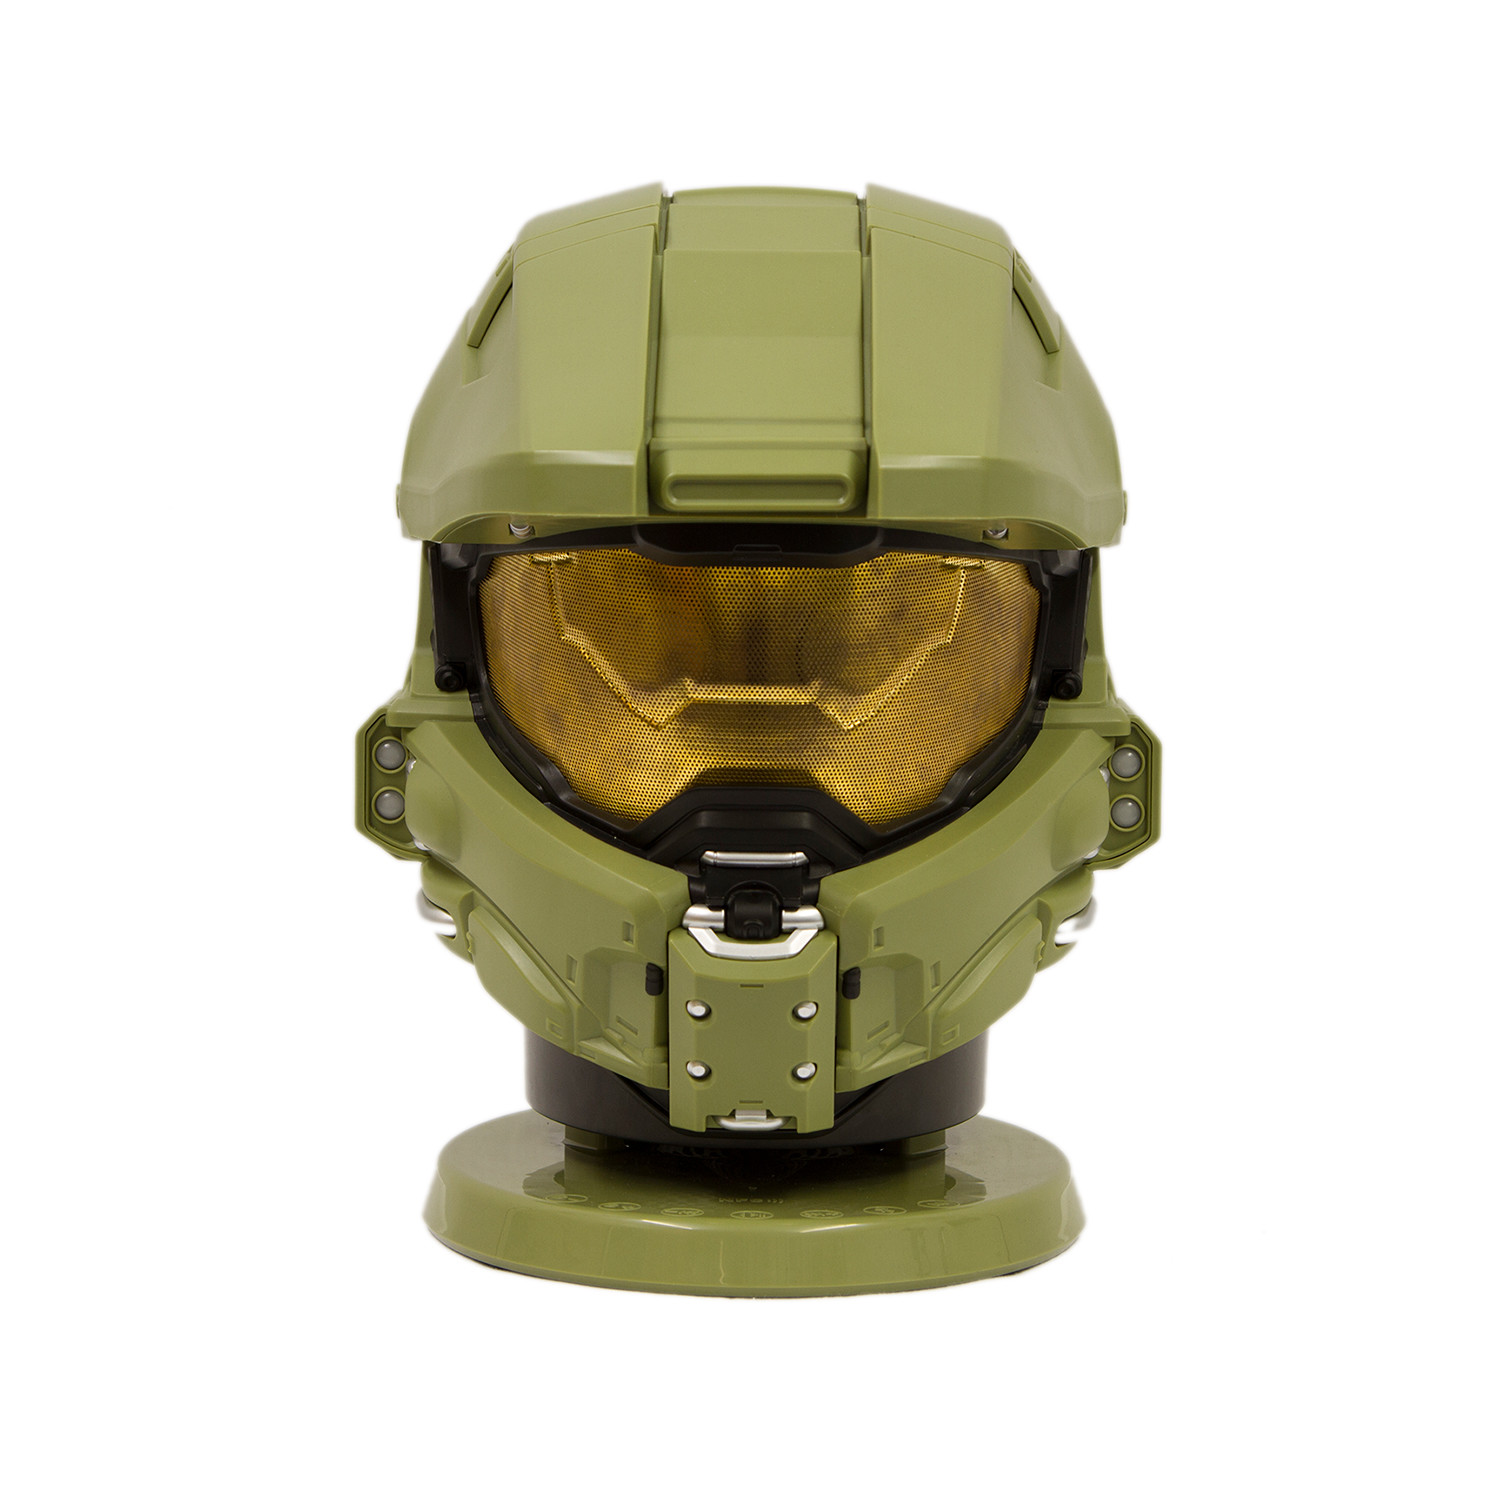 Halo Master Chief Speaker // Collector's Edition Box AC Worldwide